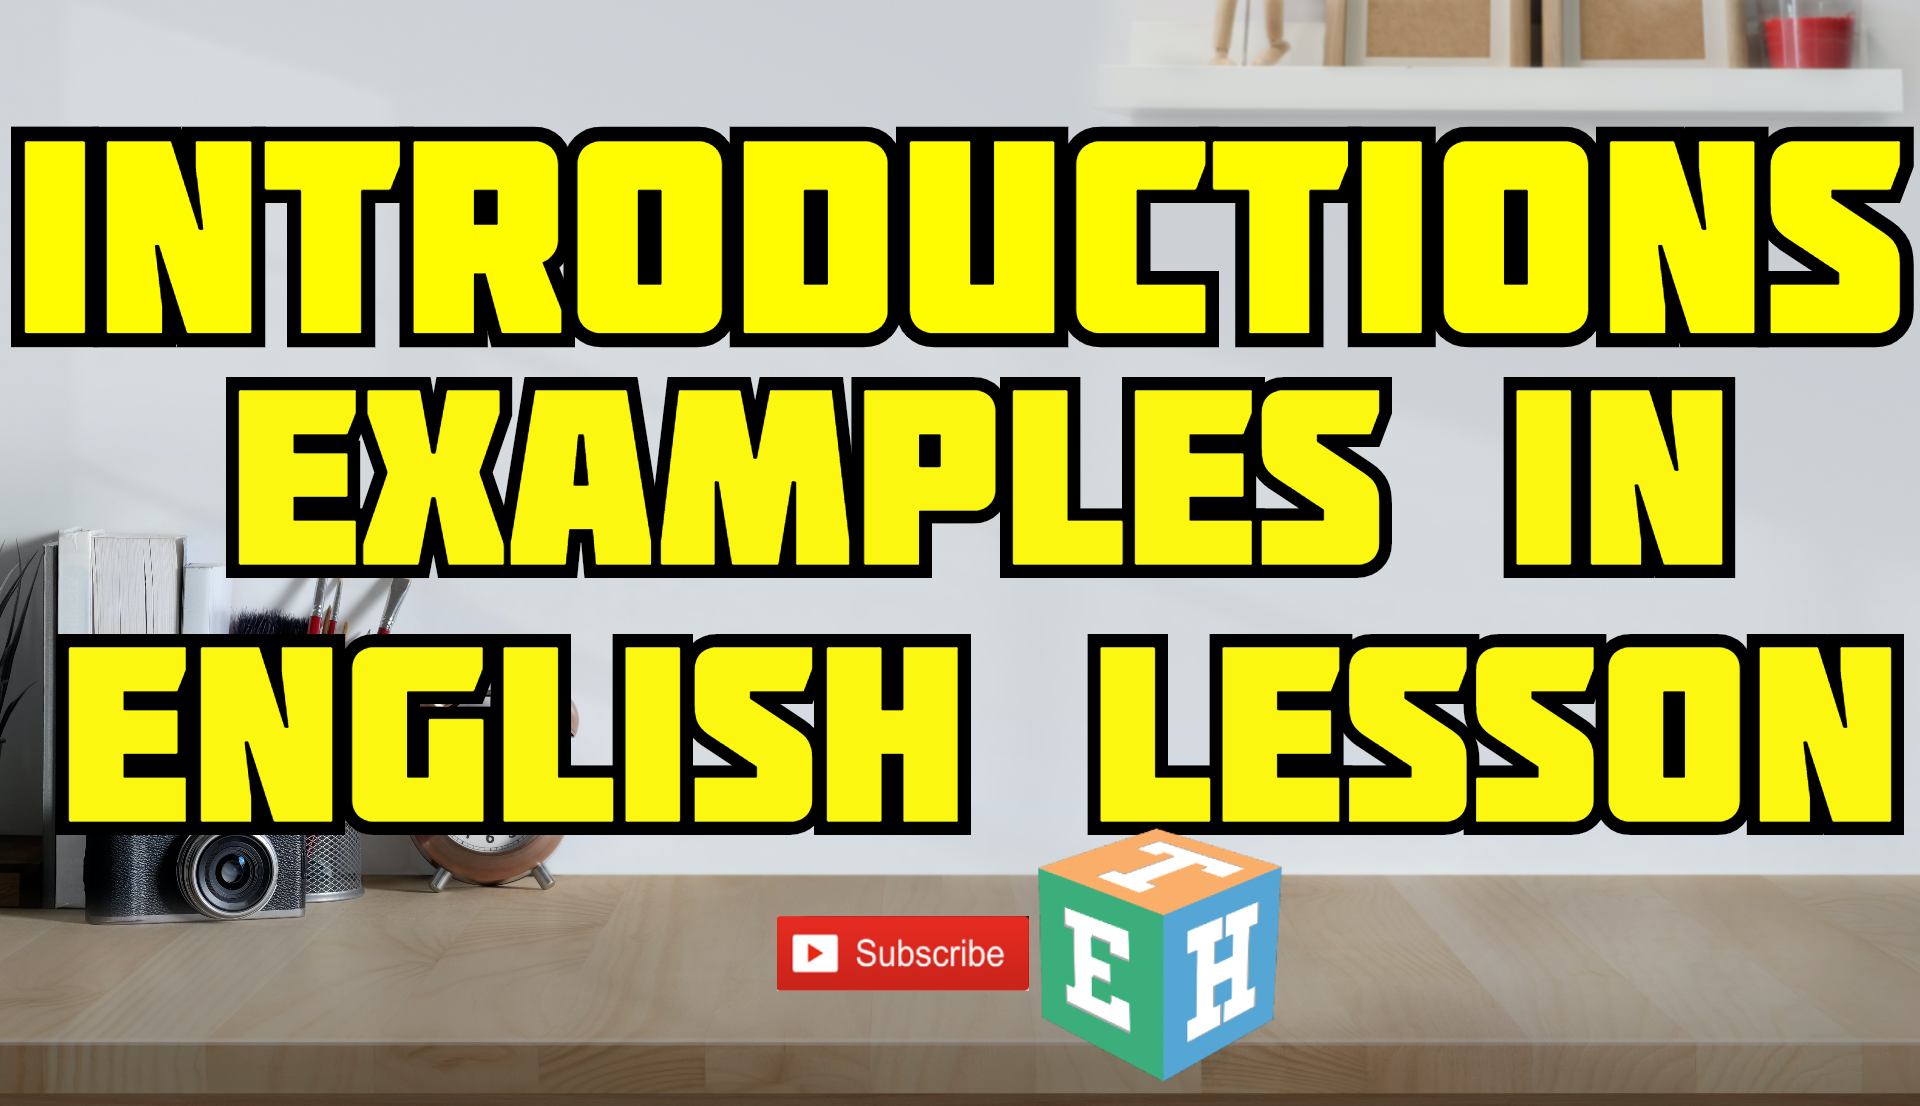 Introductions Examples in English Lesson